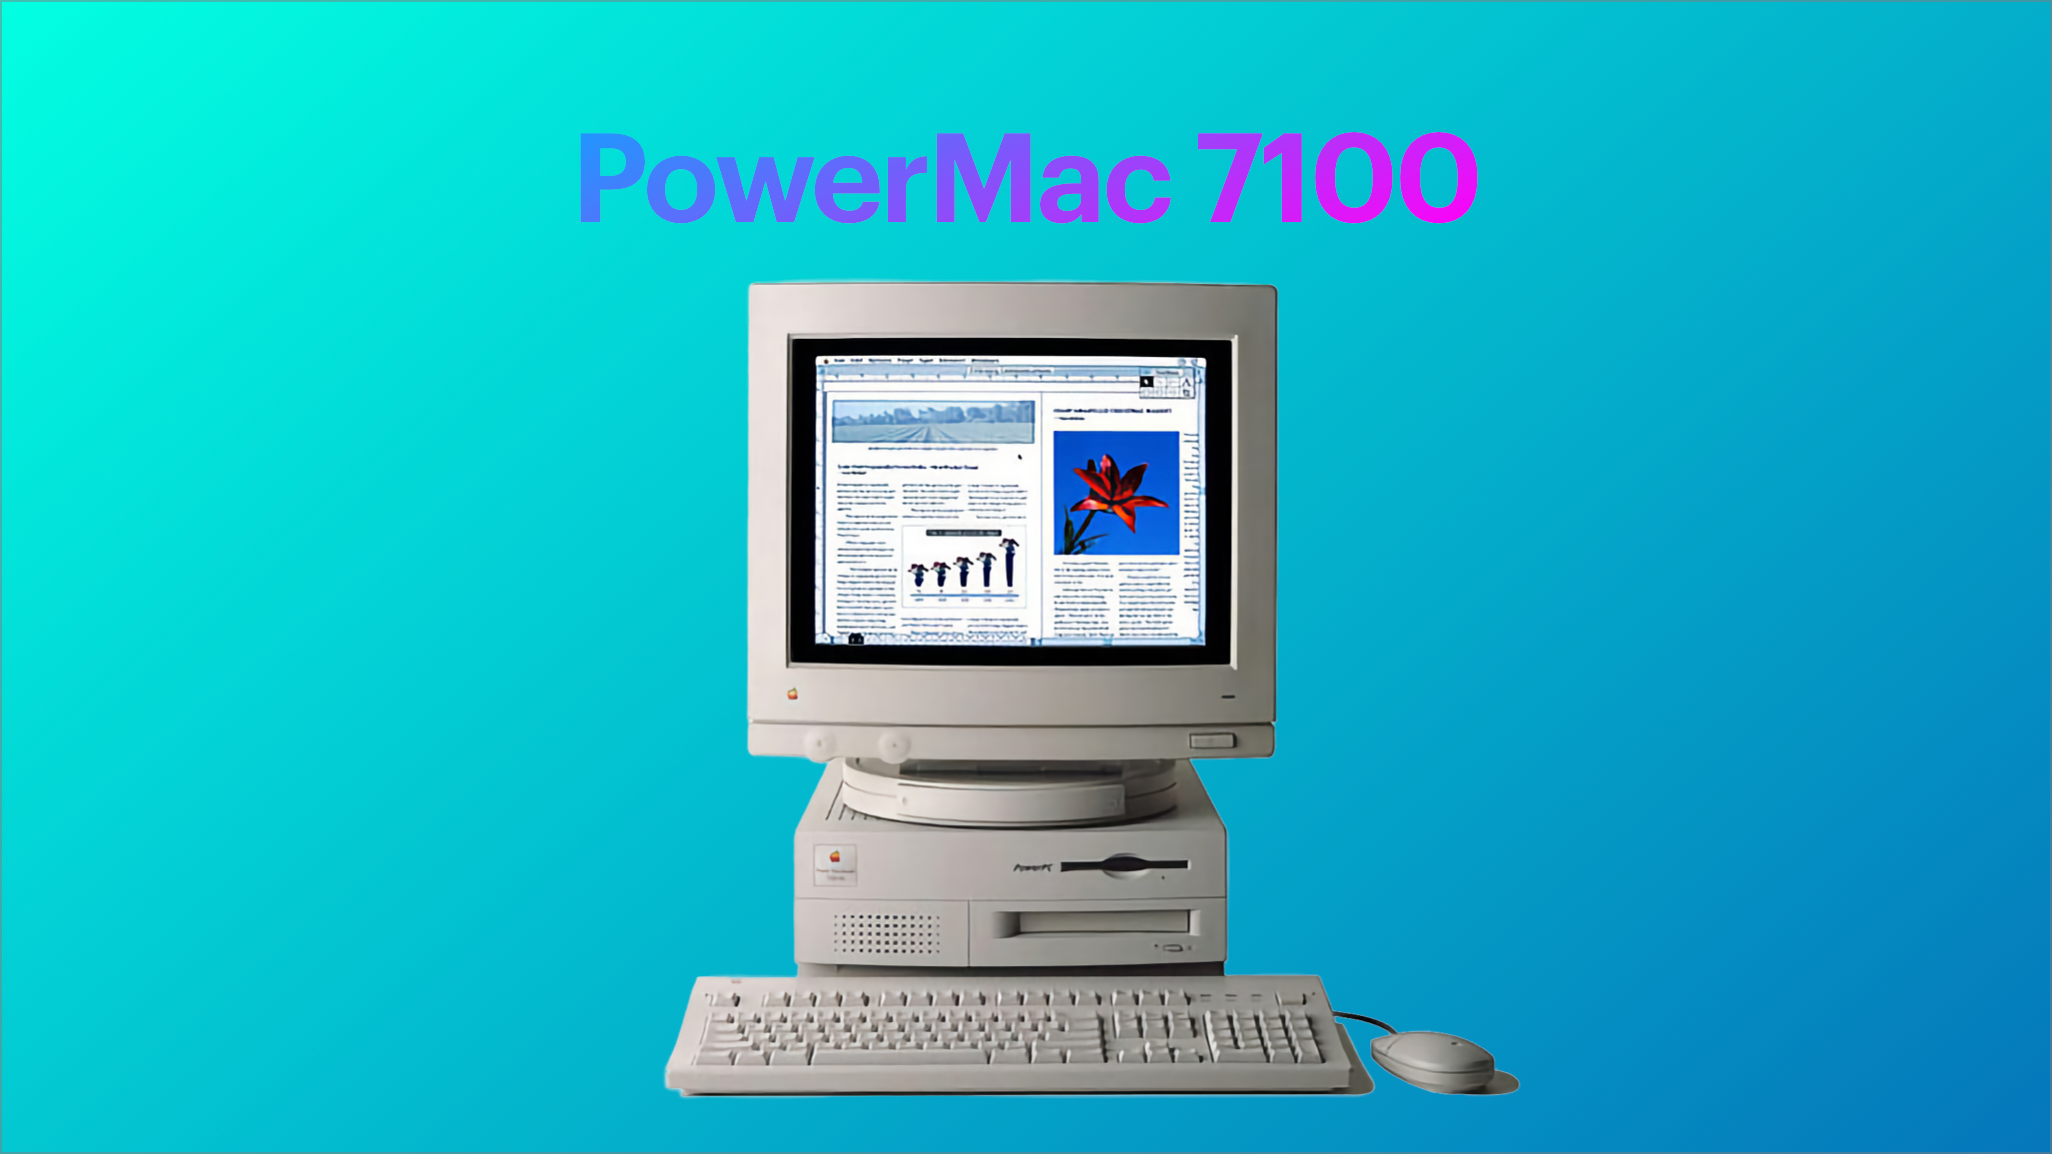 Remembering My Story of Owning a PowerMac 7100 — 1995-1996